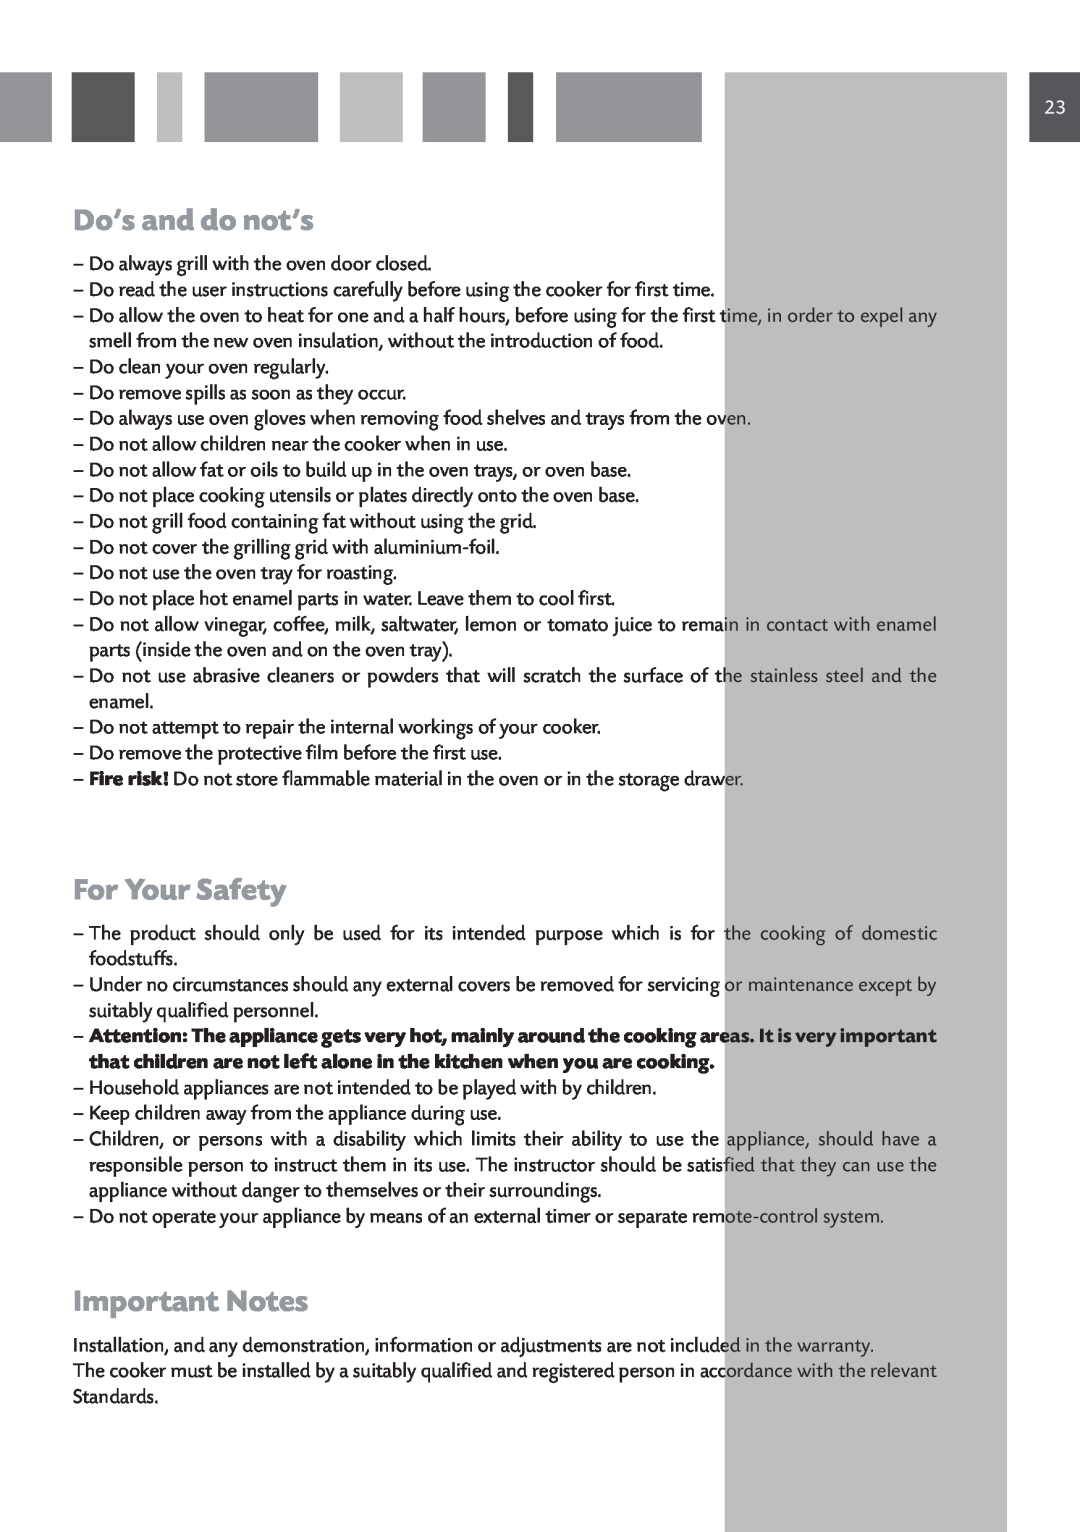 CDA RV 1060 manual Do’s and do not’s, For Your Safety, Important Notes 